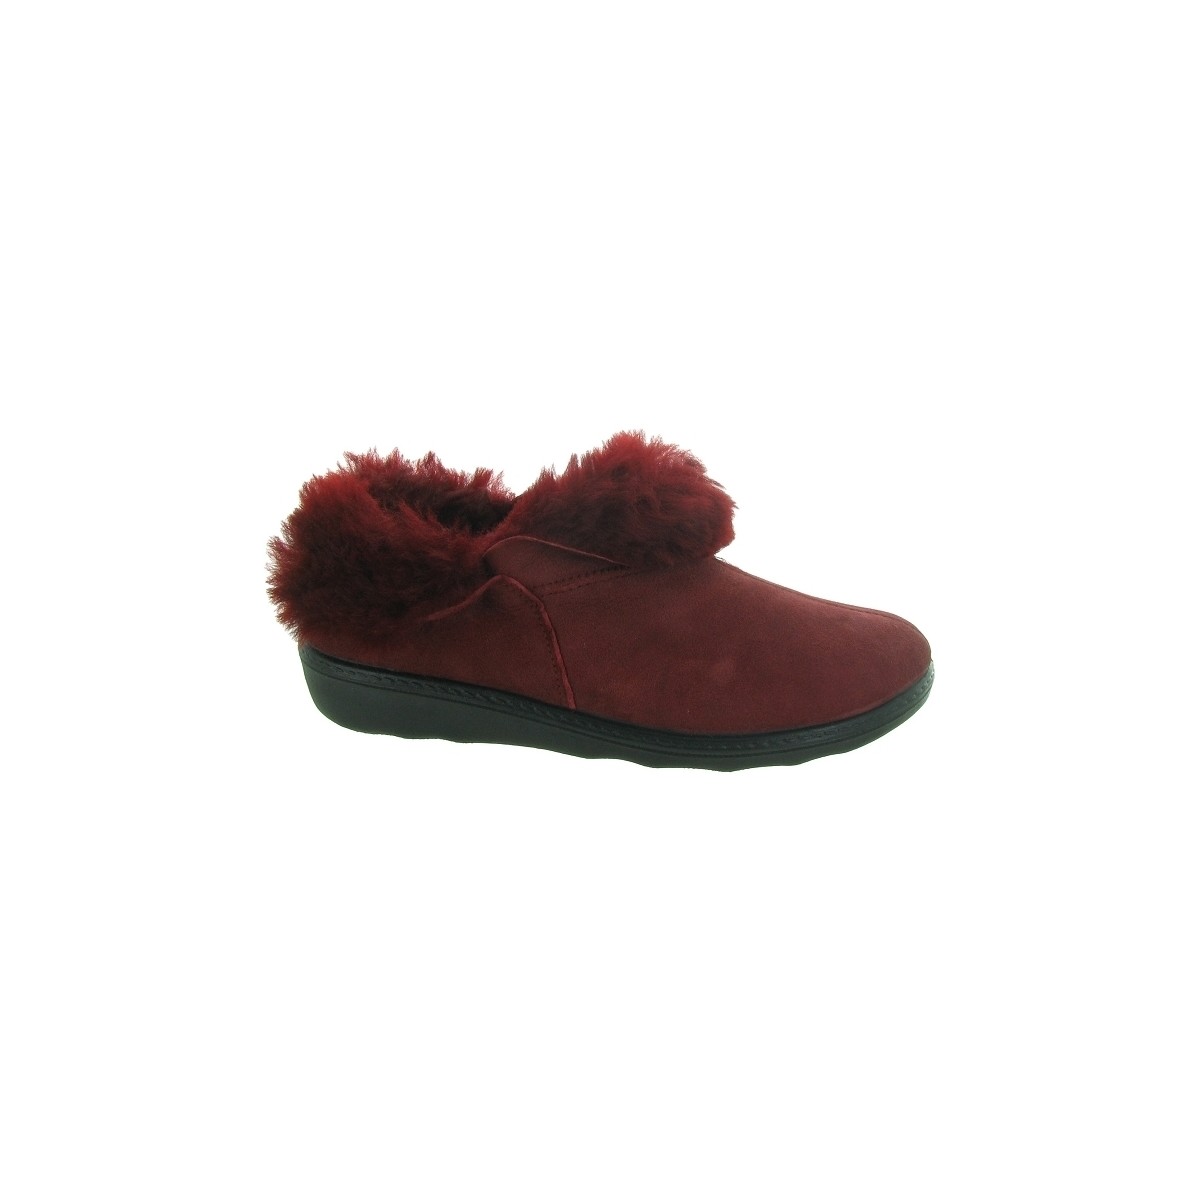 Chaussures Femme Chaussons Westland AVIGNON 102 Rouge